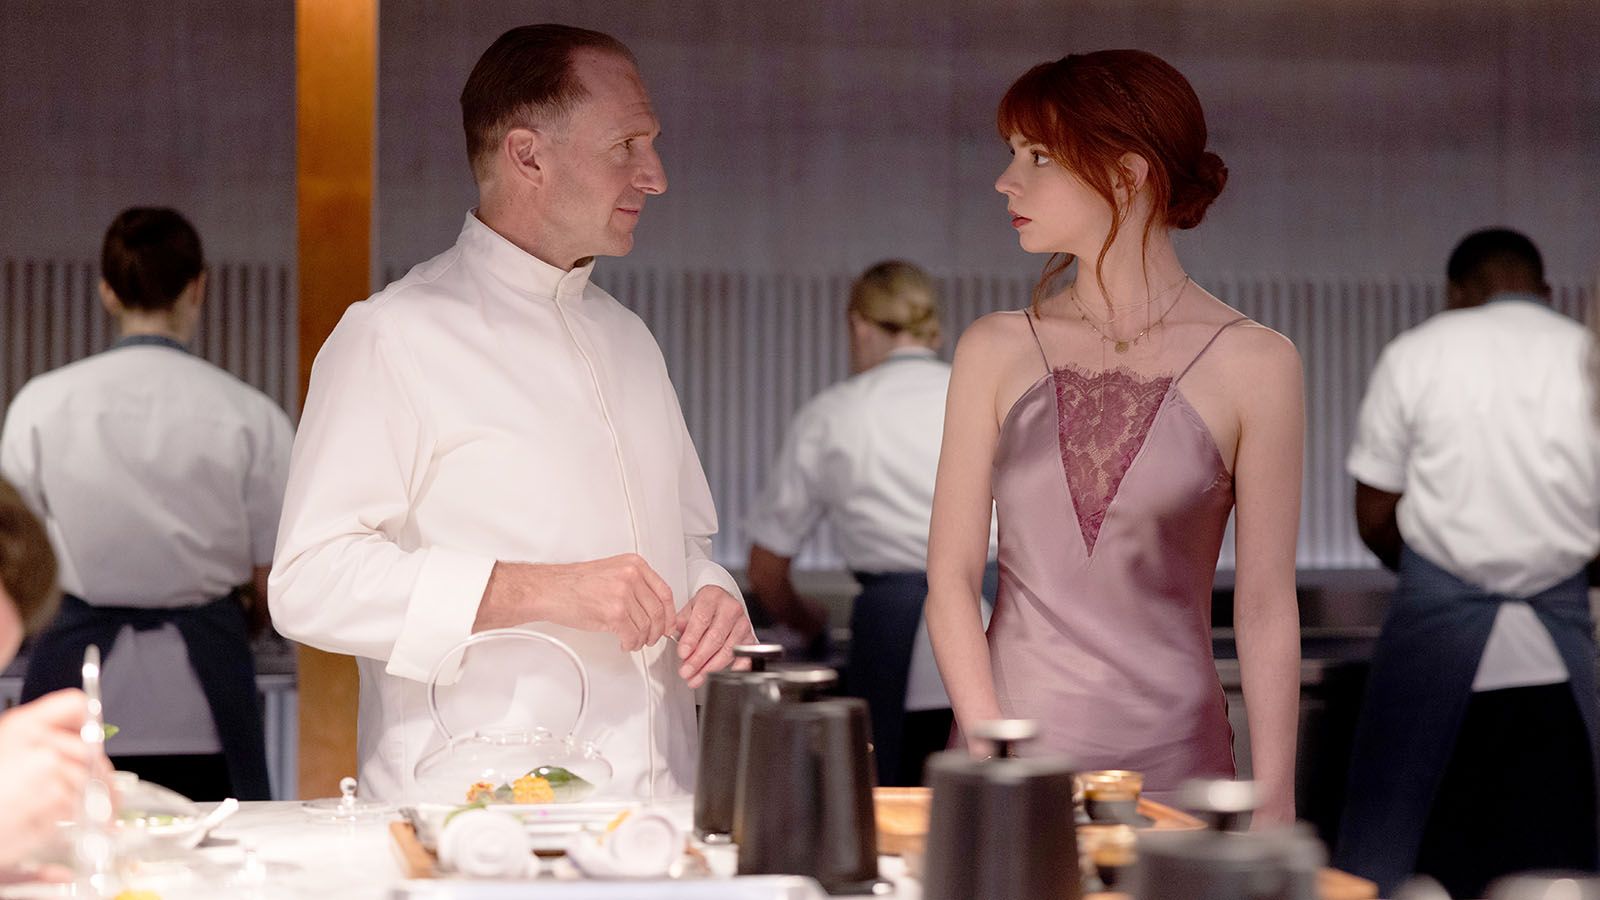 Ralph Fiennes and Anya Taylor-Joy share a scene in "The Menu."